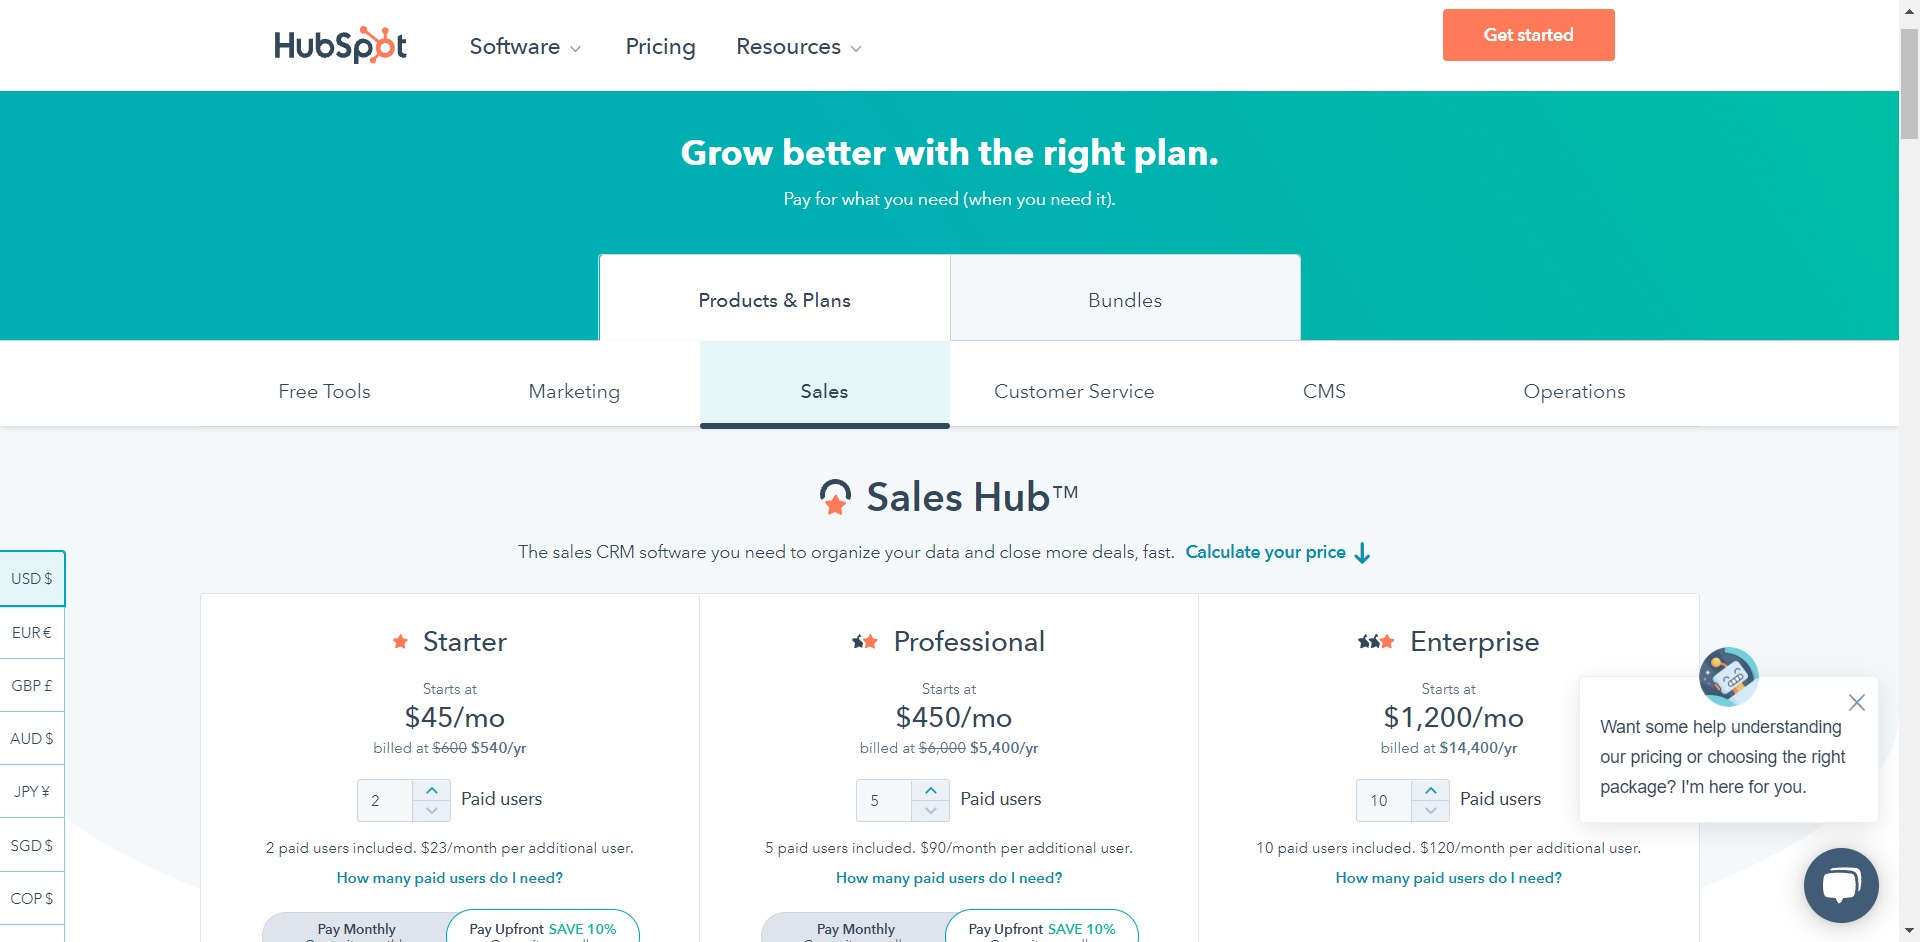 HubSpot pricing and plans